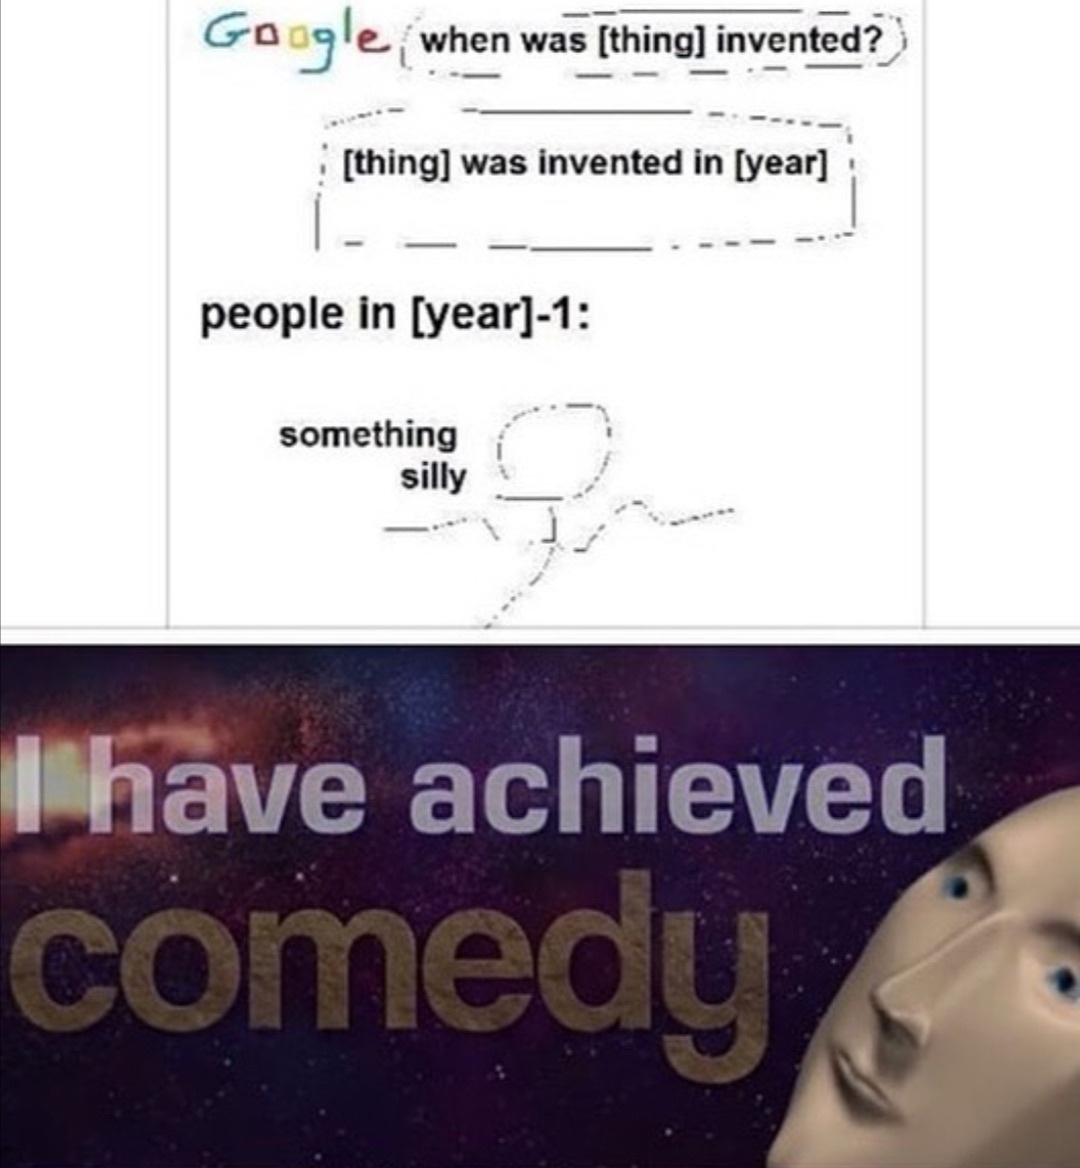 meme thing invwnted in year - Google when was thing invented? thing was invented in year people in year1 something something silly I have achieved comedy